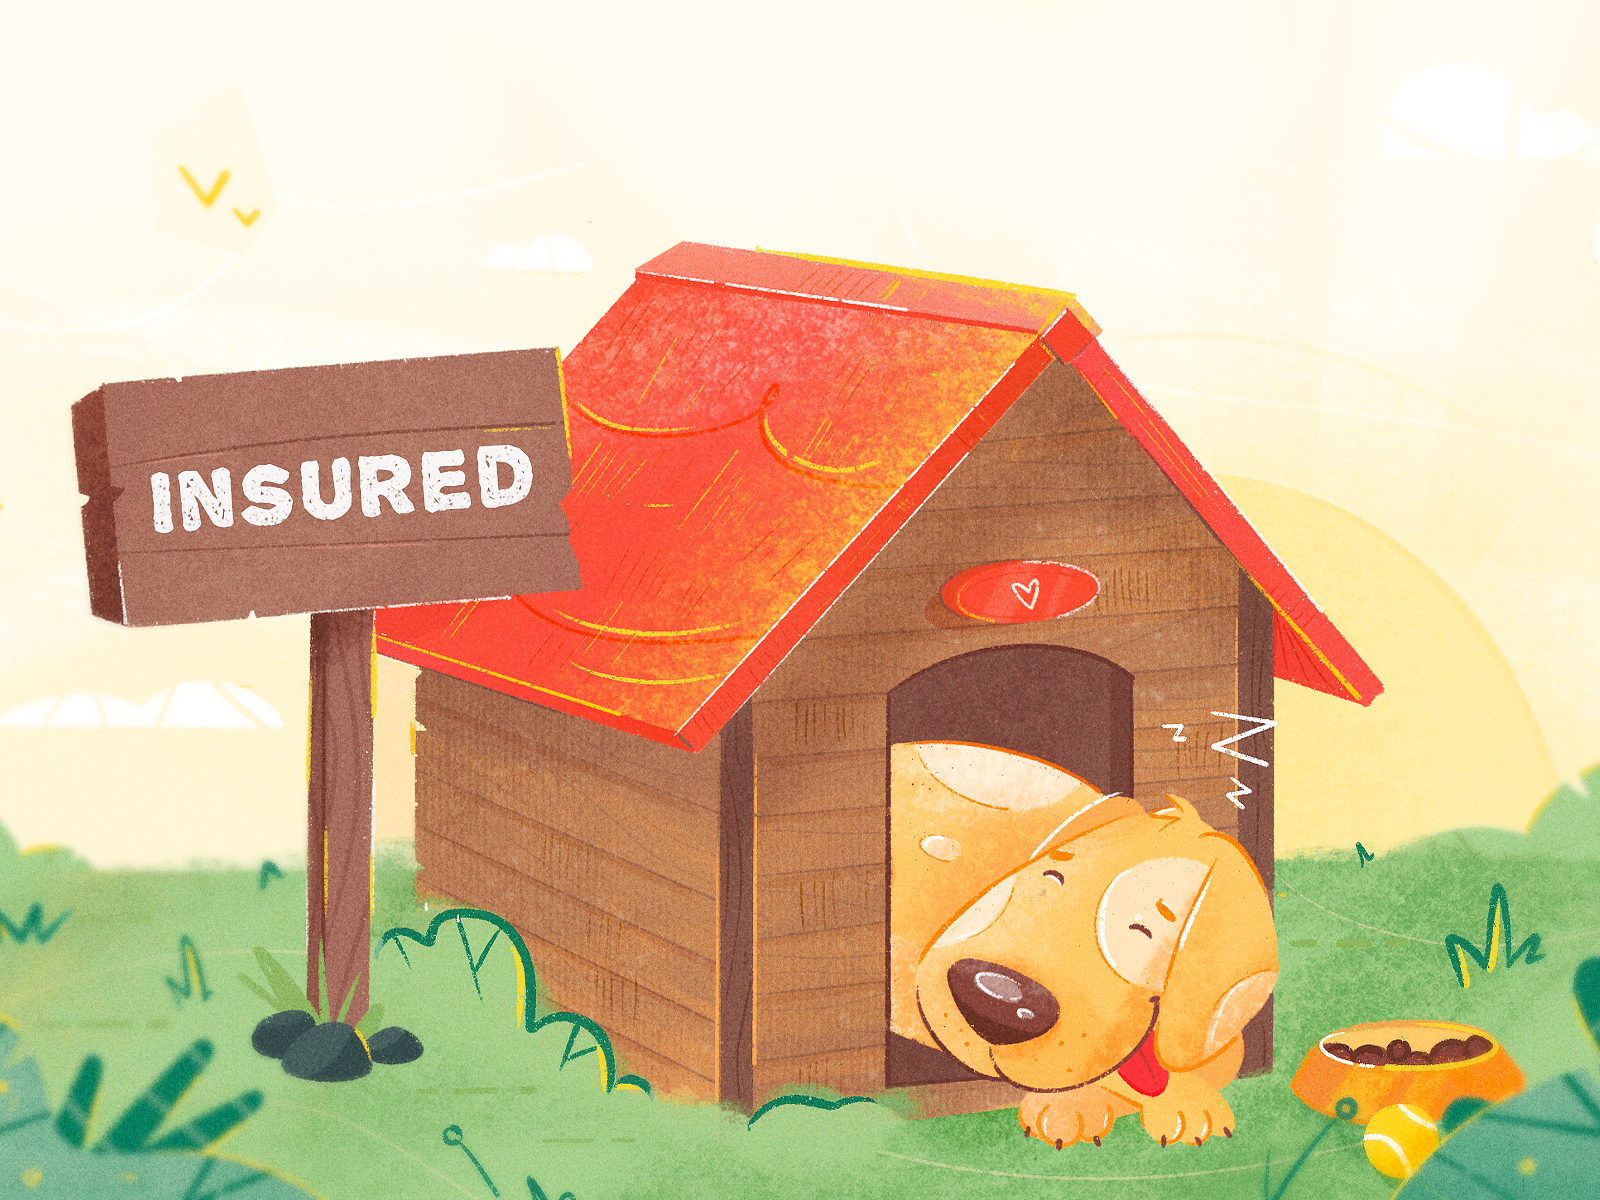 Insured sunset ball sign house home landscape nature animal pet dog procreate advert advertisement health medicare insurance texture drawing character illustration